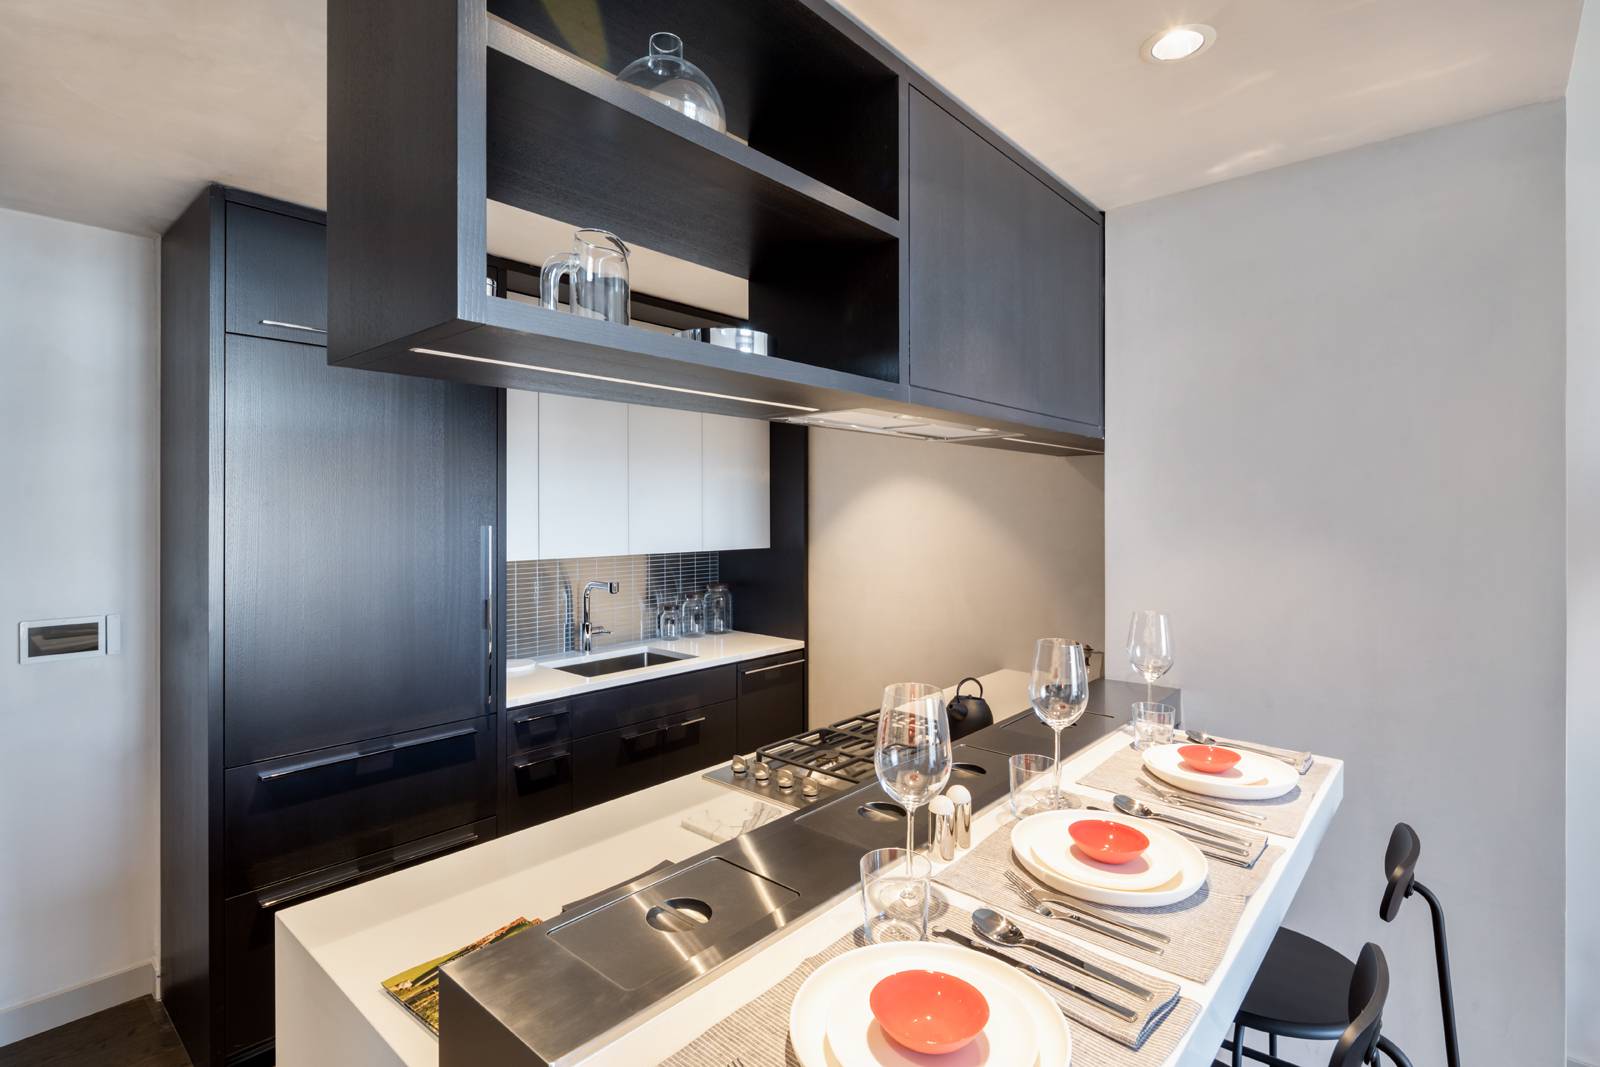 Special Features This unit features 11' Ceilings Residence 77GG is a 688 square foot one bedroom, one bathroom with an open gourmet kitchen and breakfast bar and This spacious residence ...